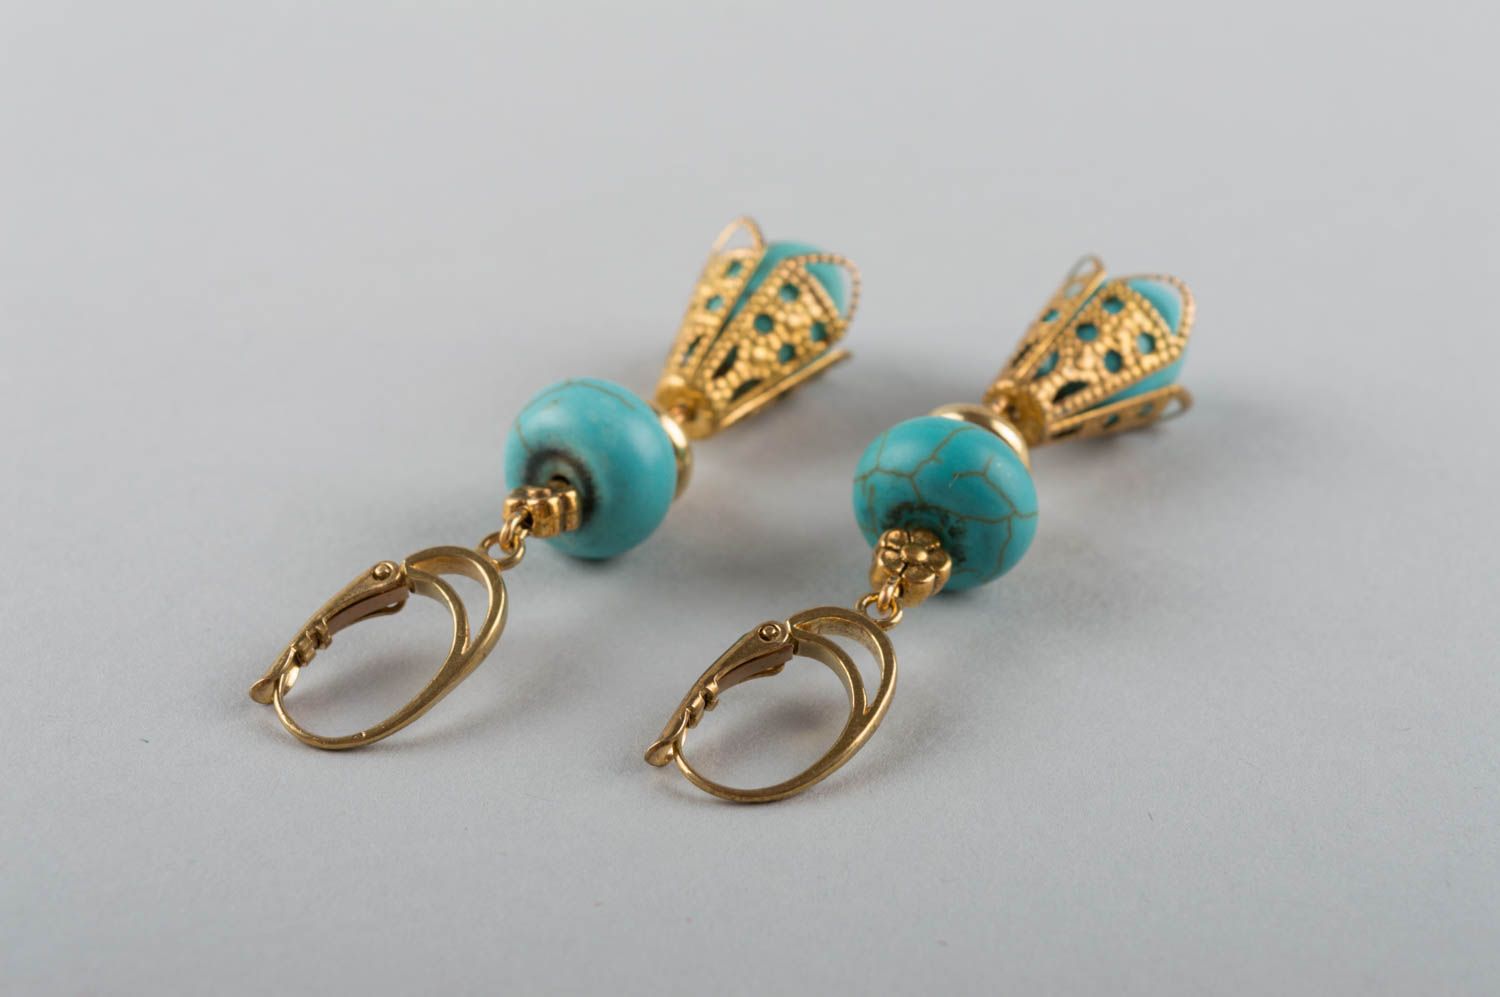 Handmade accessory made of natural stones earrings made of turquoise and brass photo 4